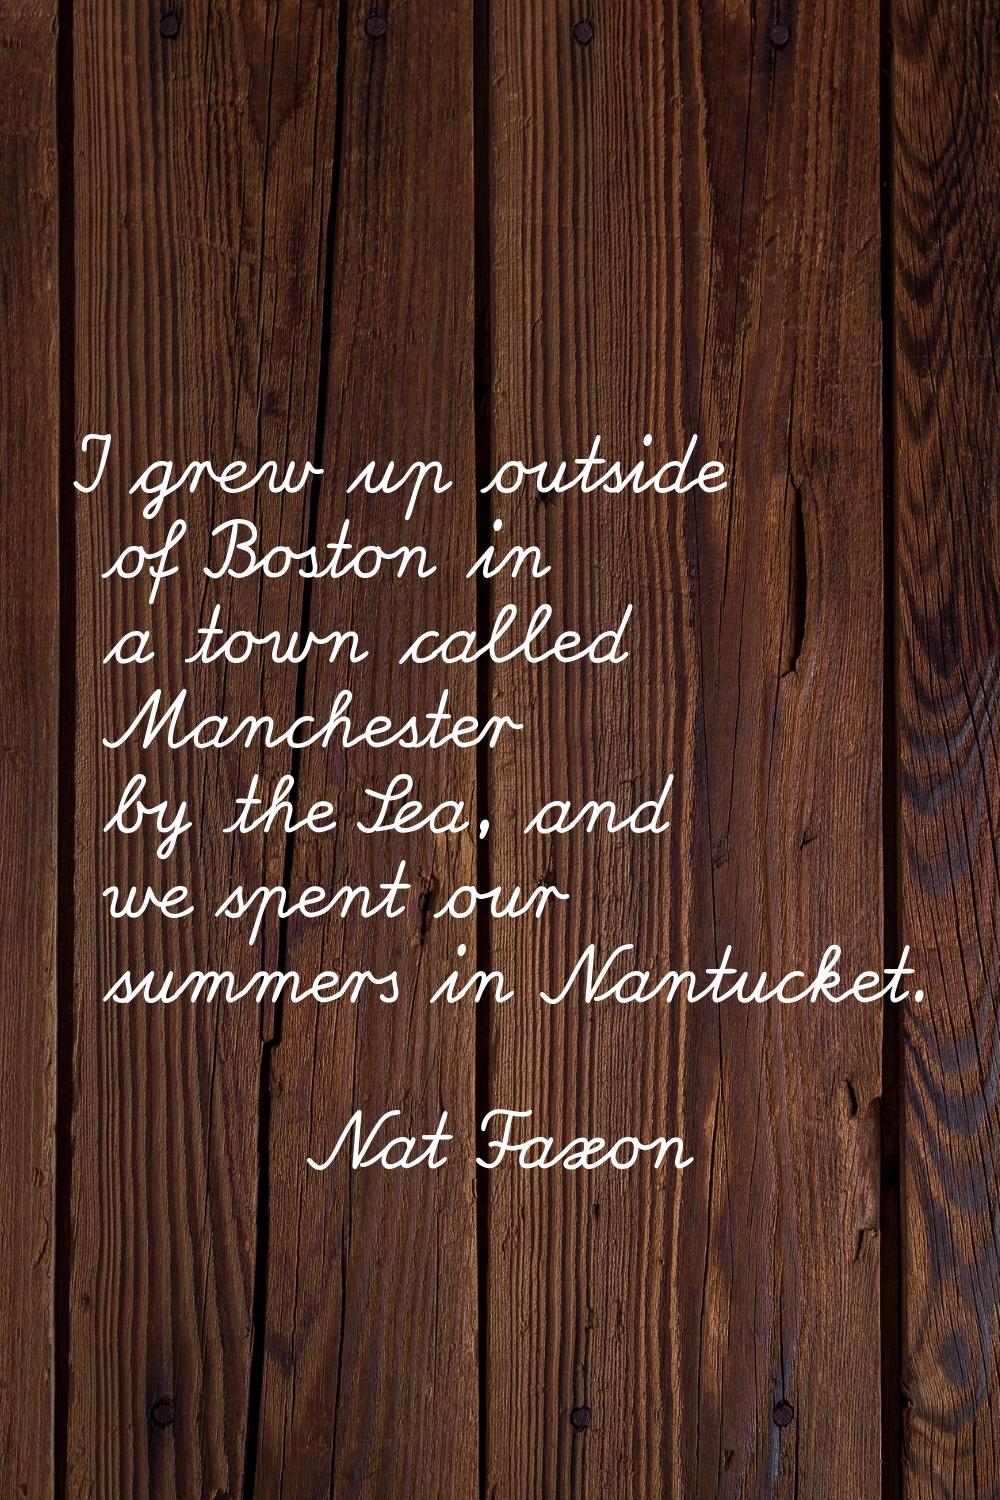 I grew up outside of Boston in a town called Manchester by the Sea, and we spent our summers in Nan